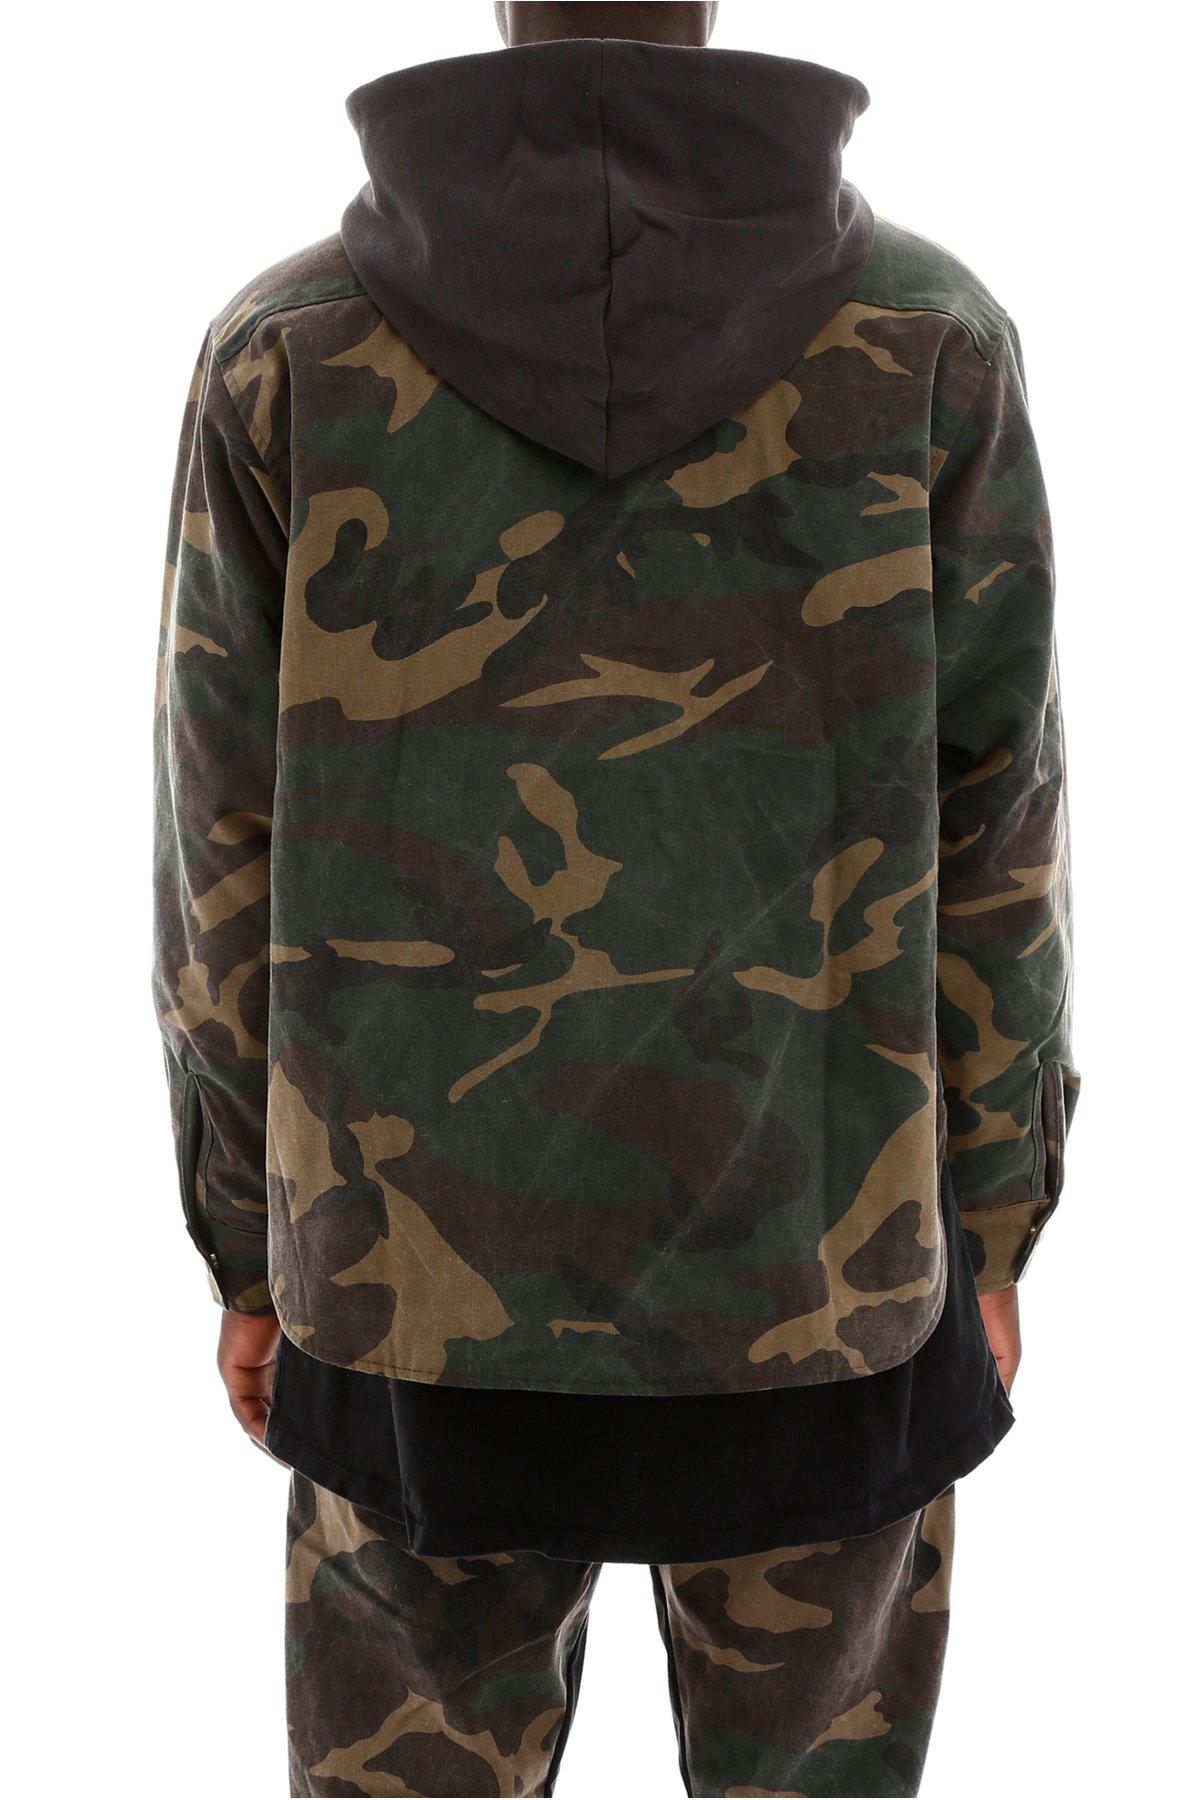 Rhude Cotton Camouflage Jacket for Men - Lyst